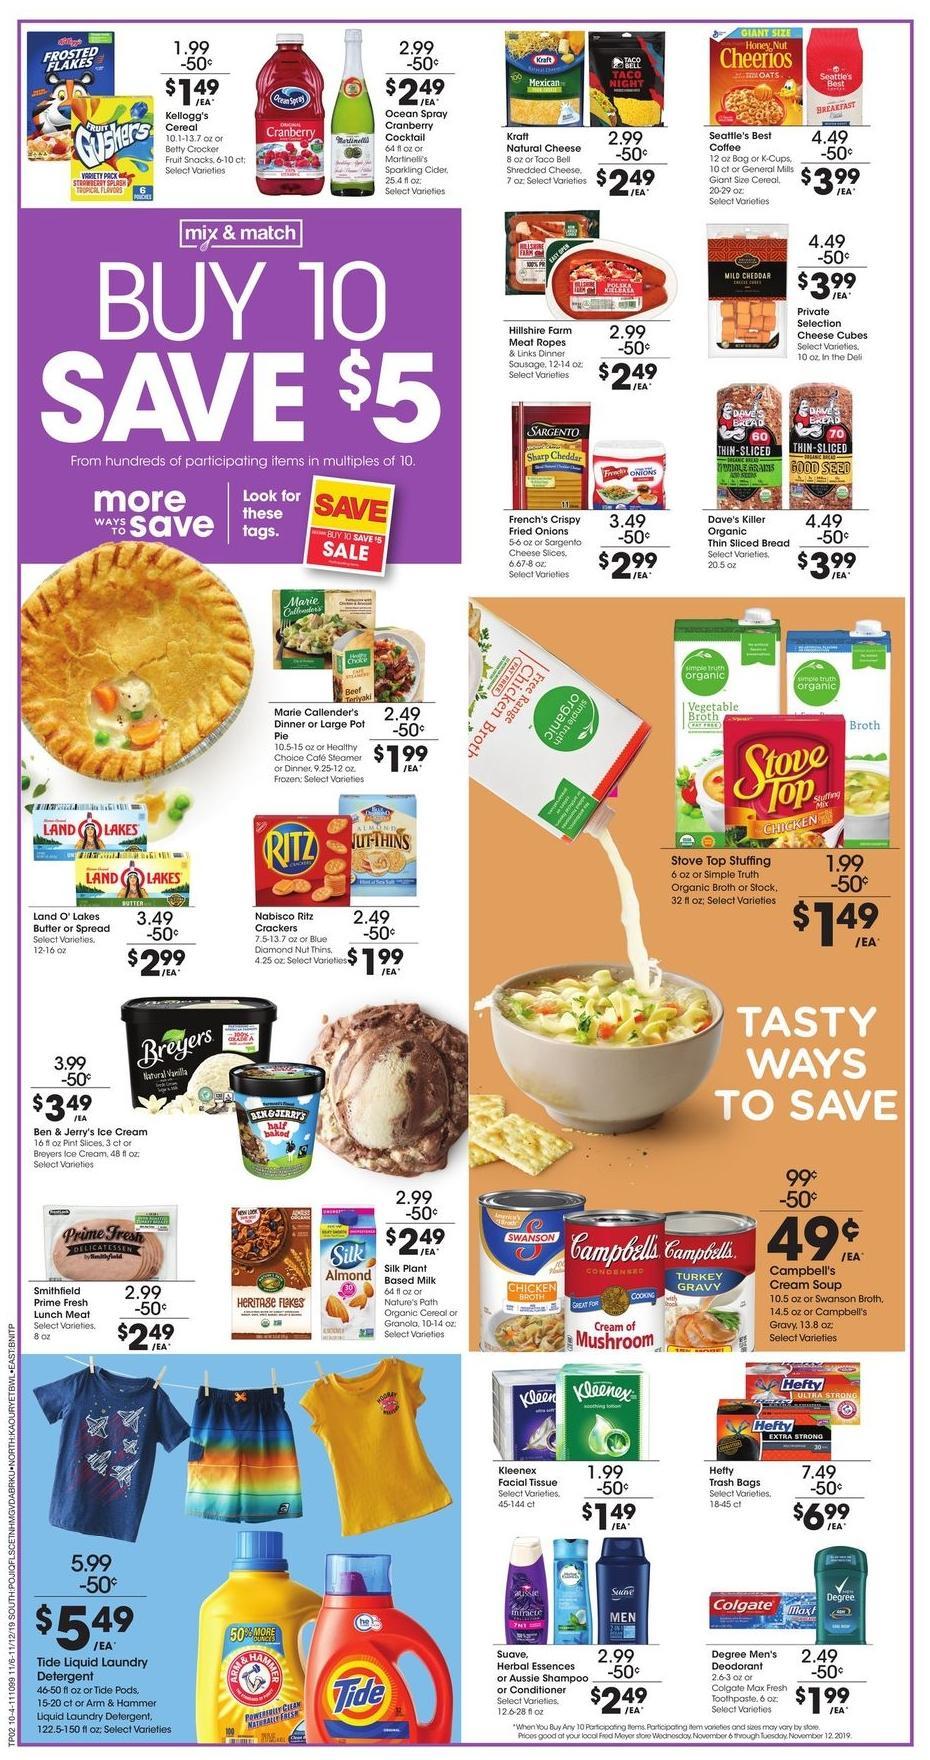 Fred Meyer Weekly Ad from November 6